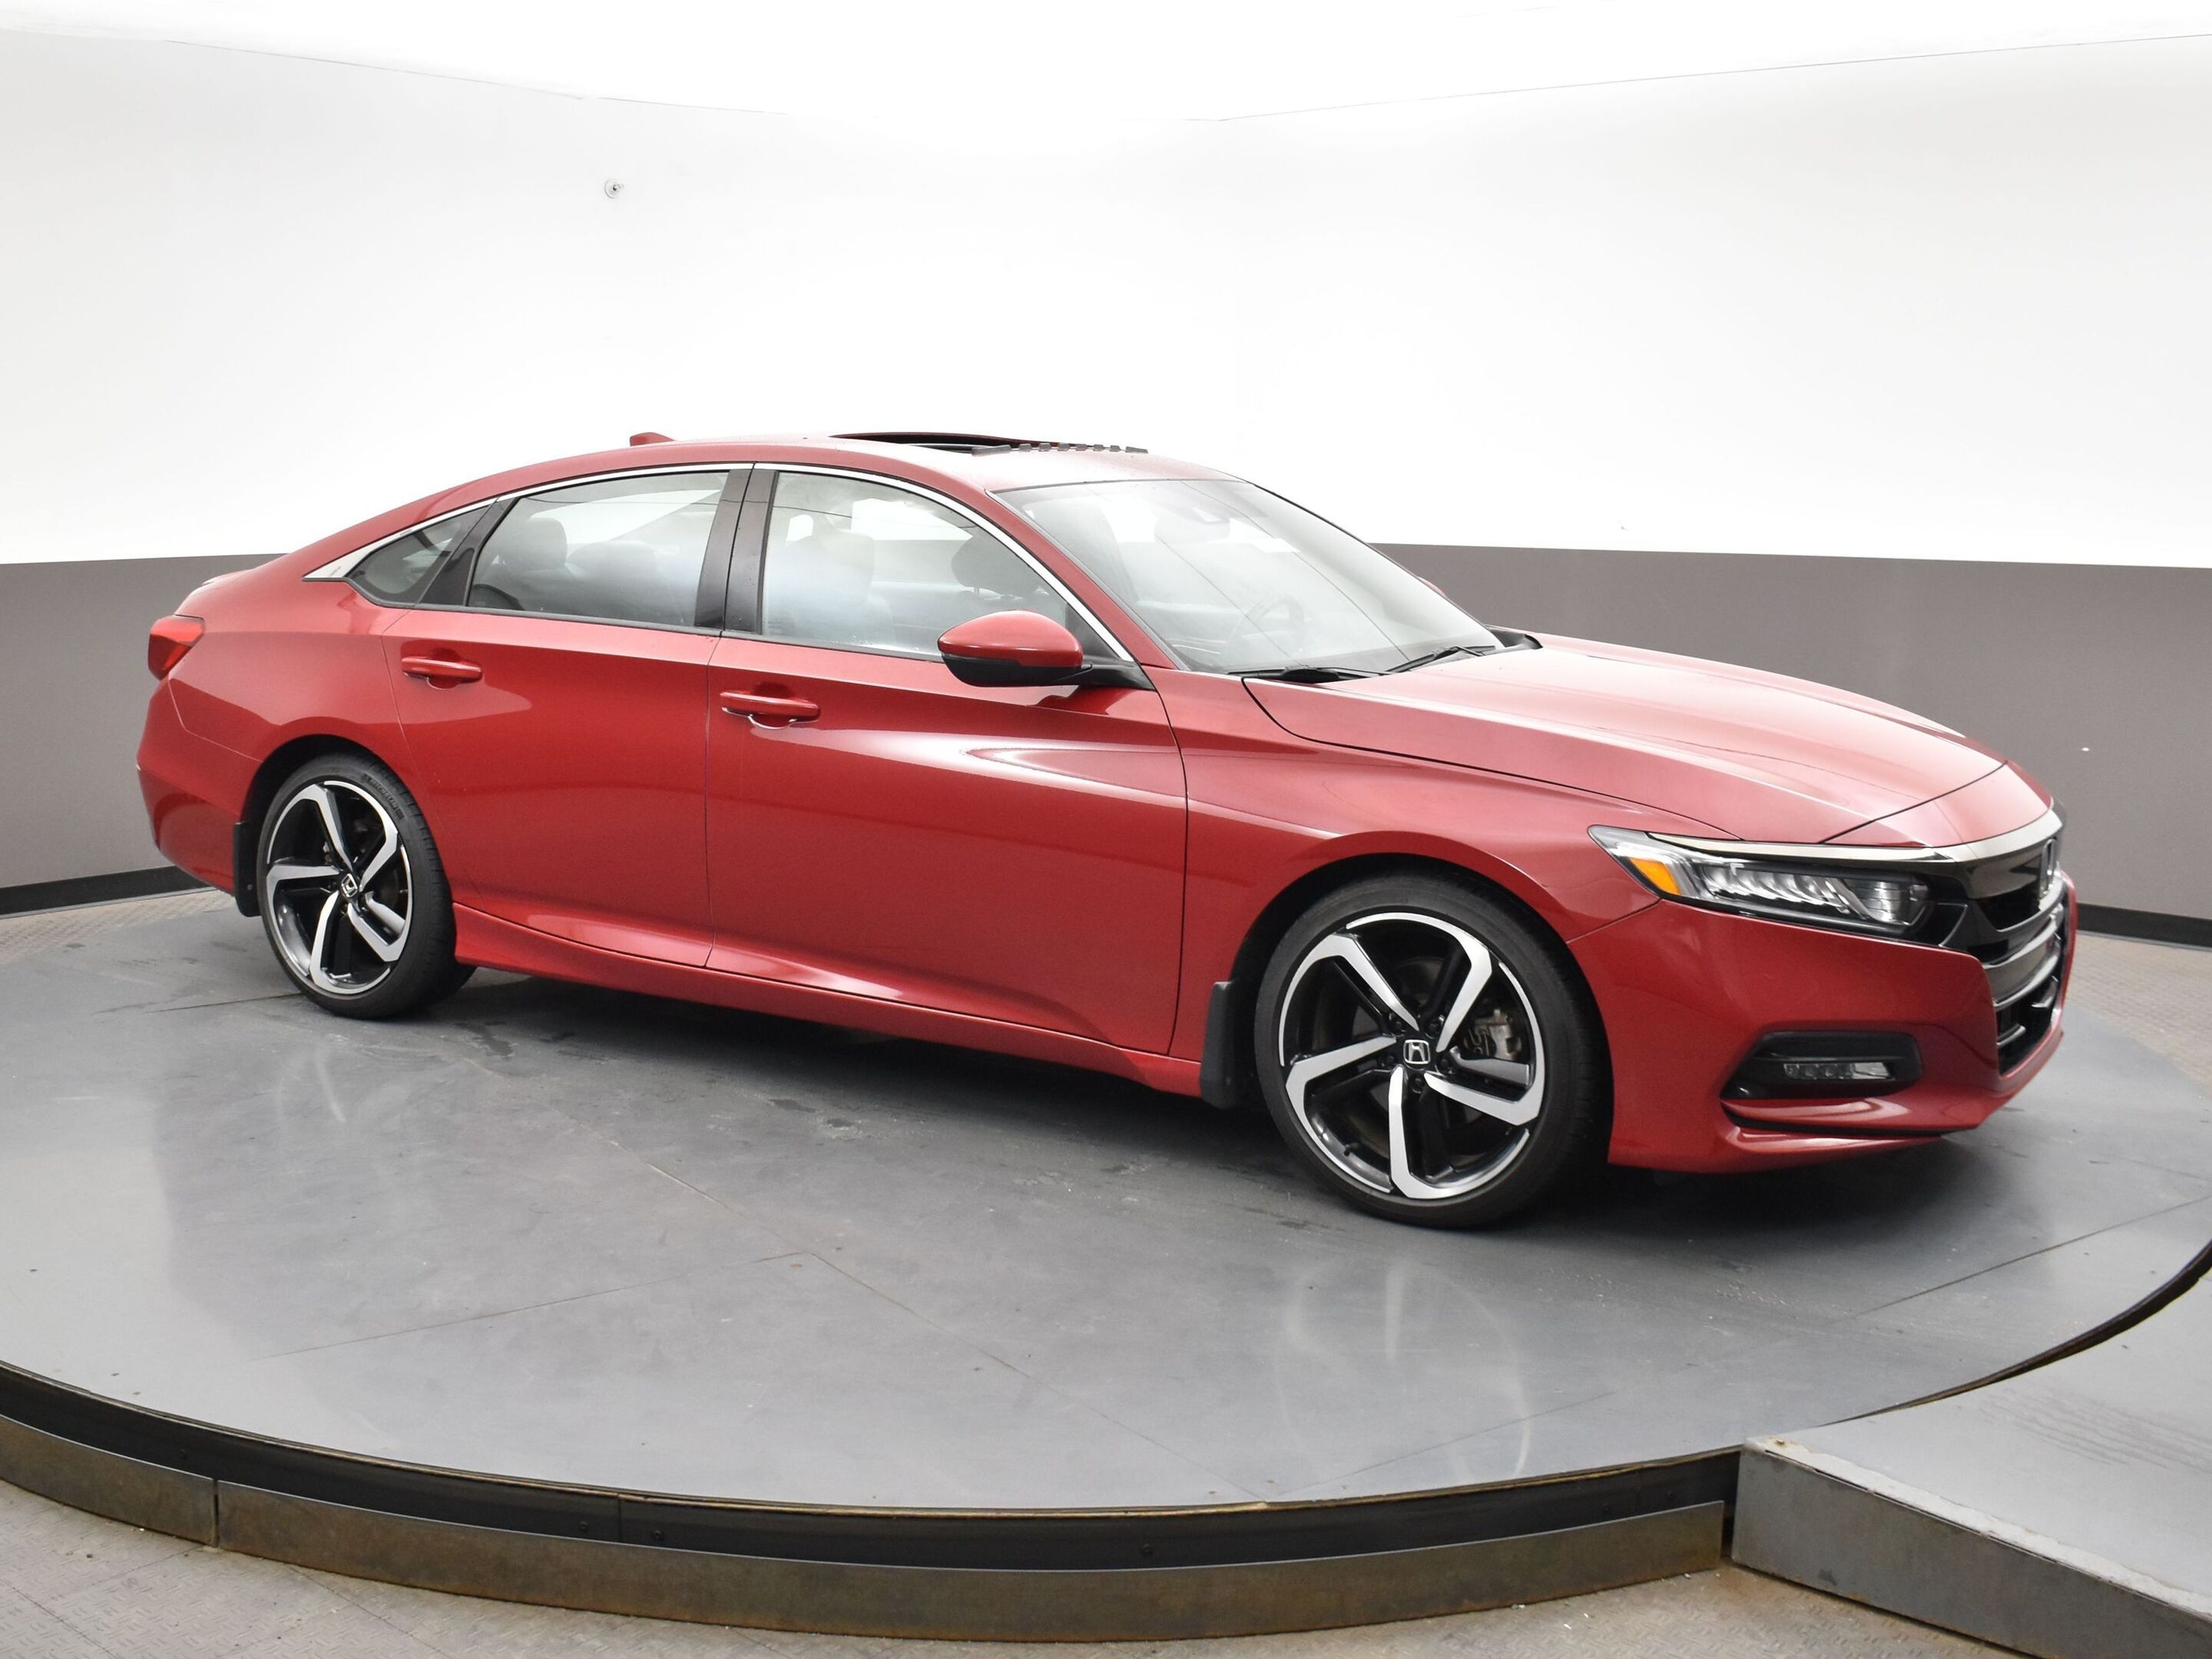 2020 Honda Accord SPORT - Call 902-469-8484 To Book Appointment! Lea